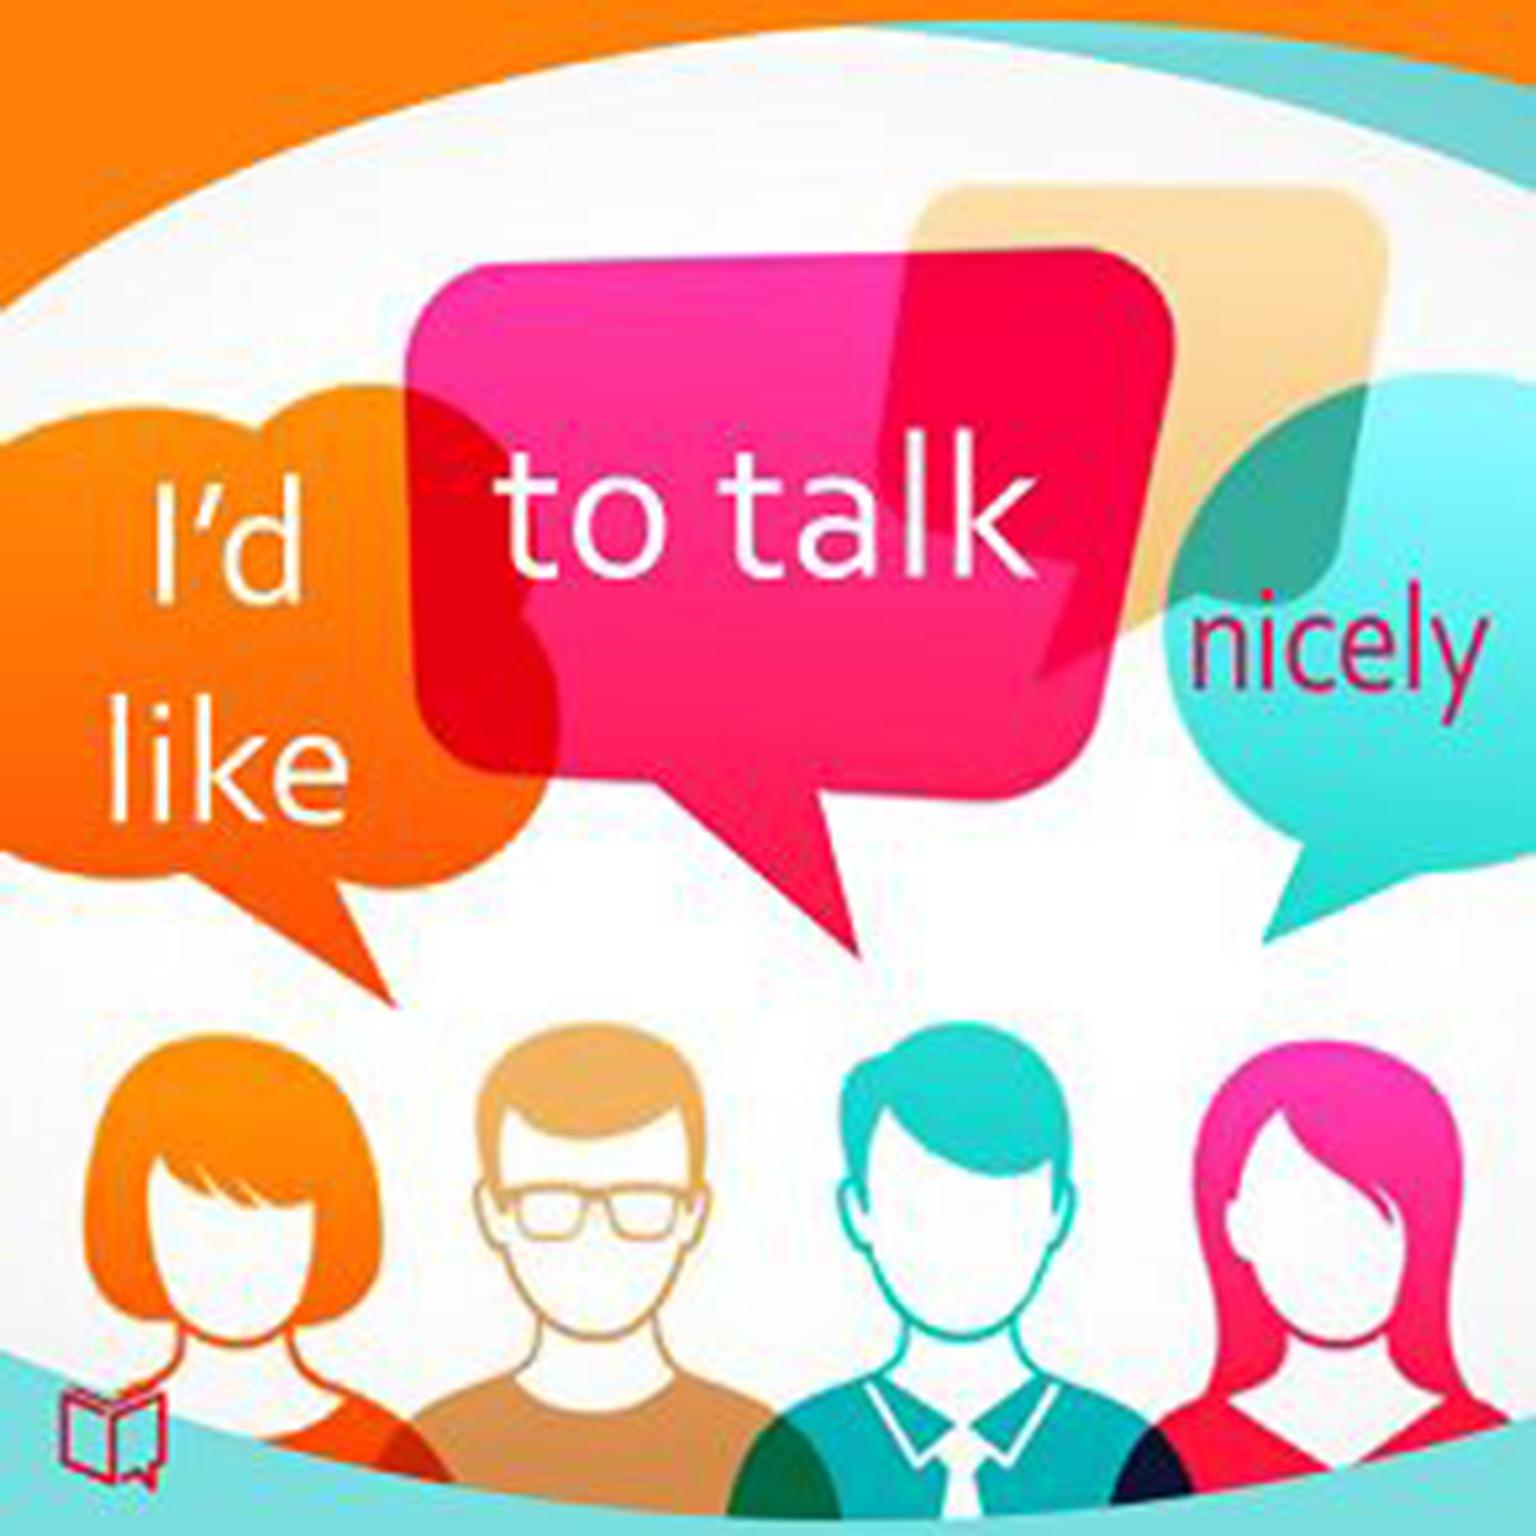 Id Like To Talk Nicely Audiobook, by Quentin Bach